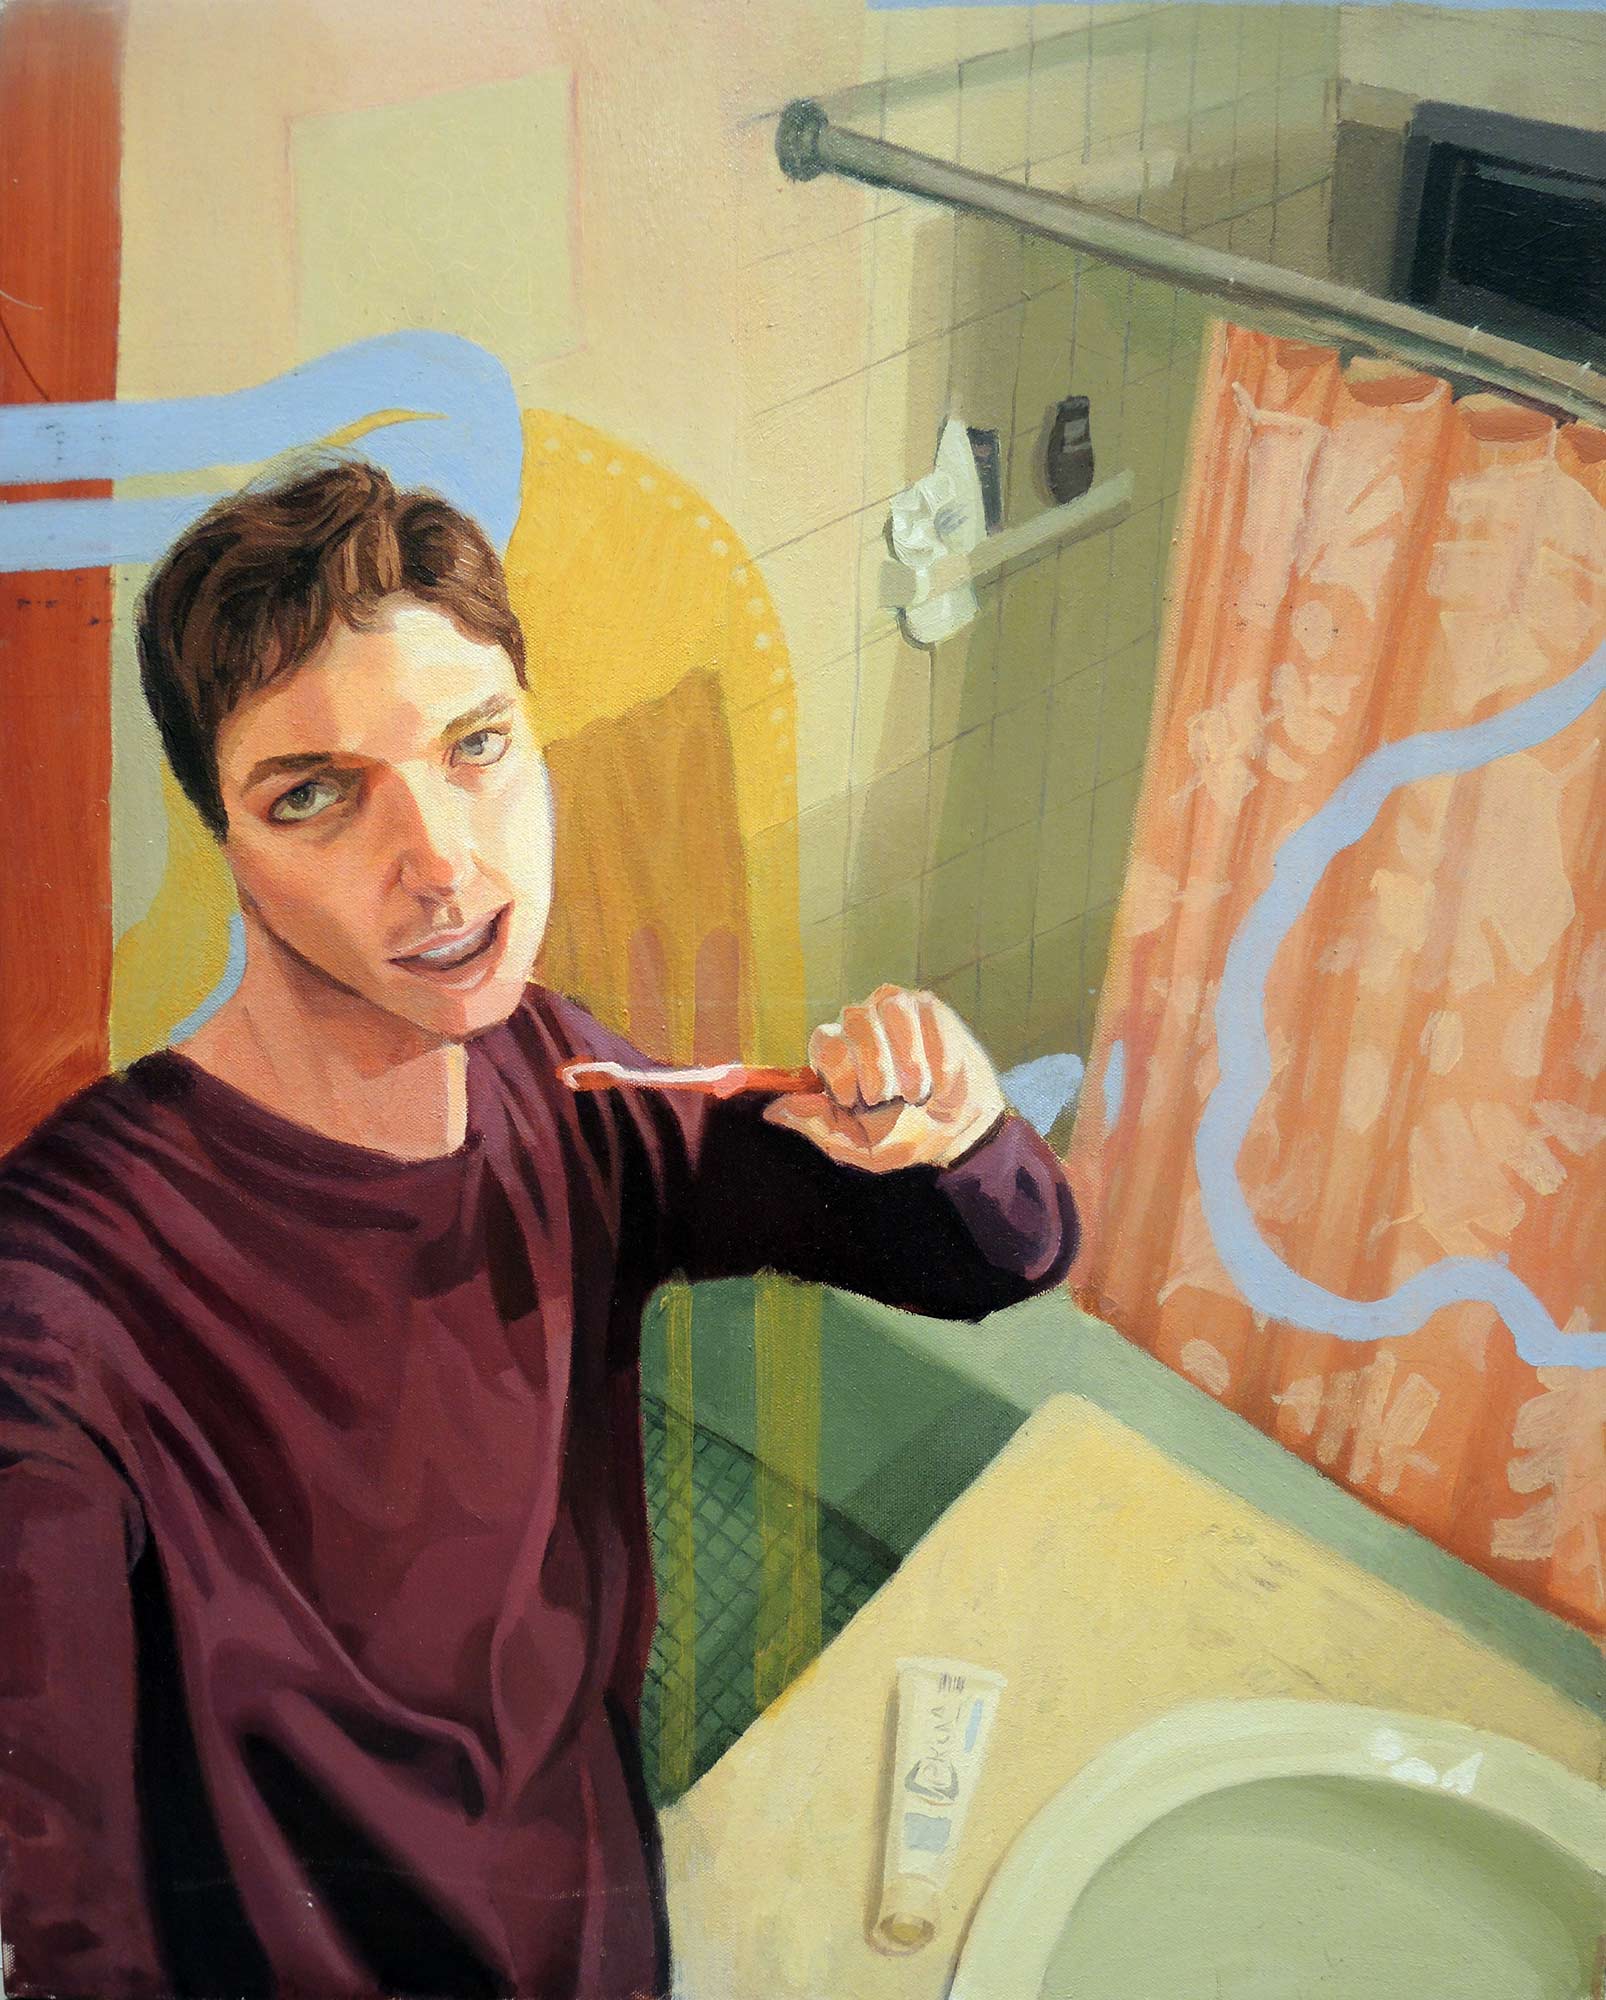 A paitning of a young man brushing his teeth